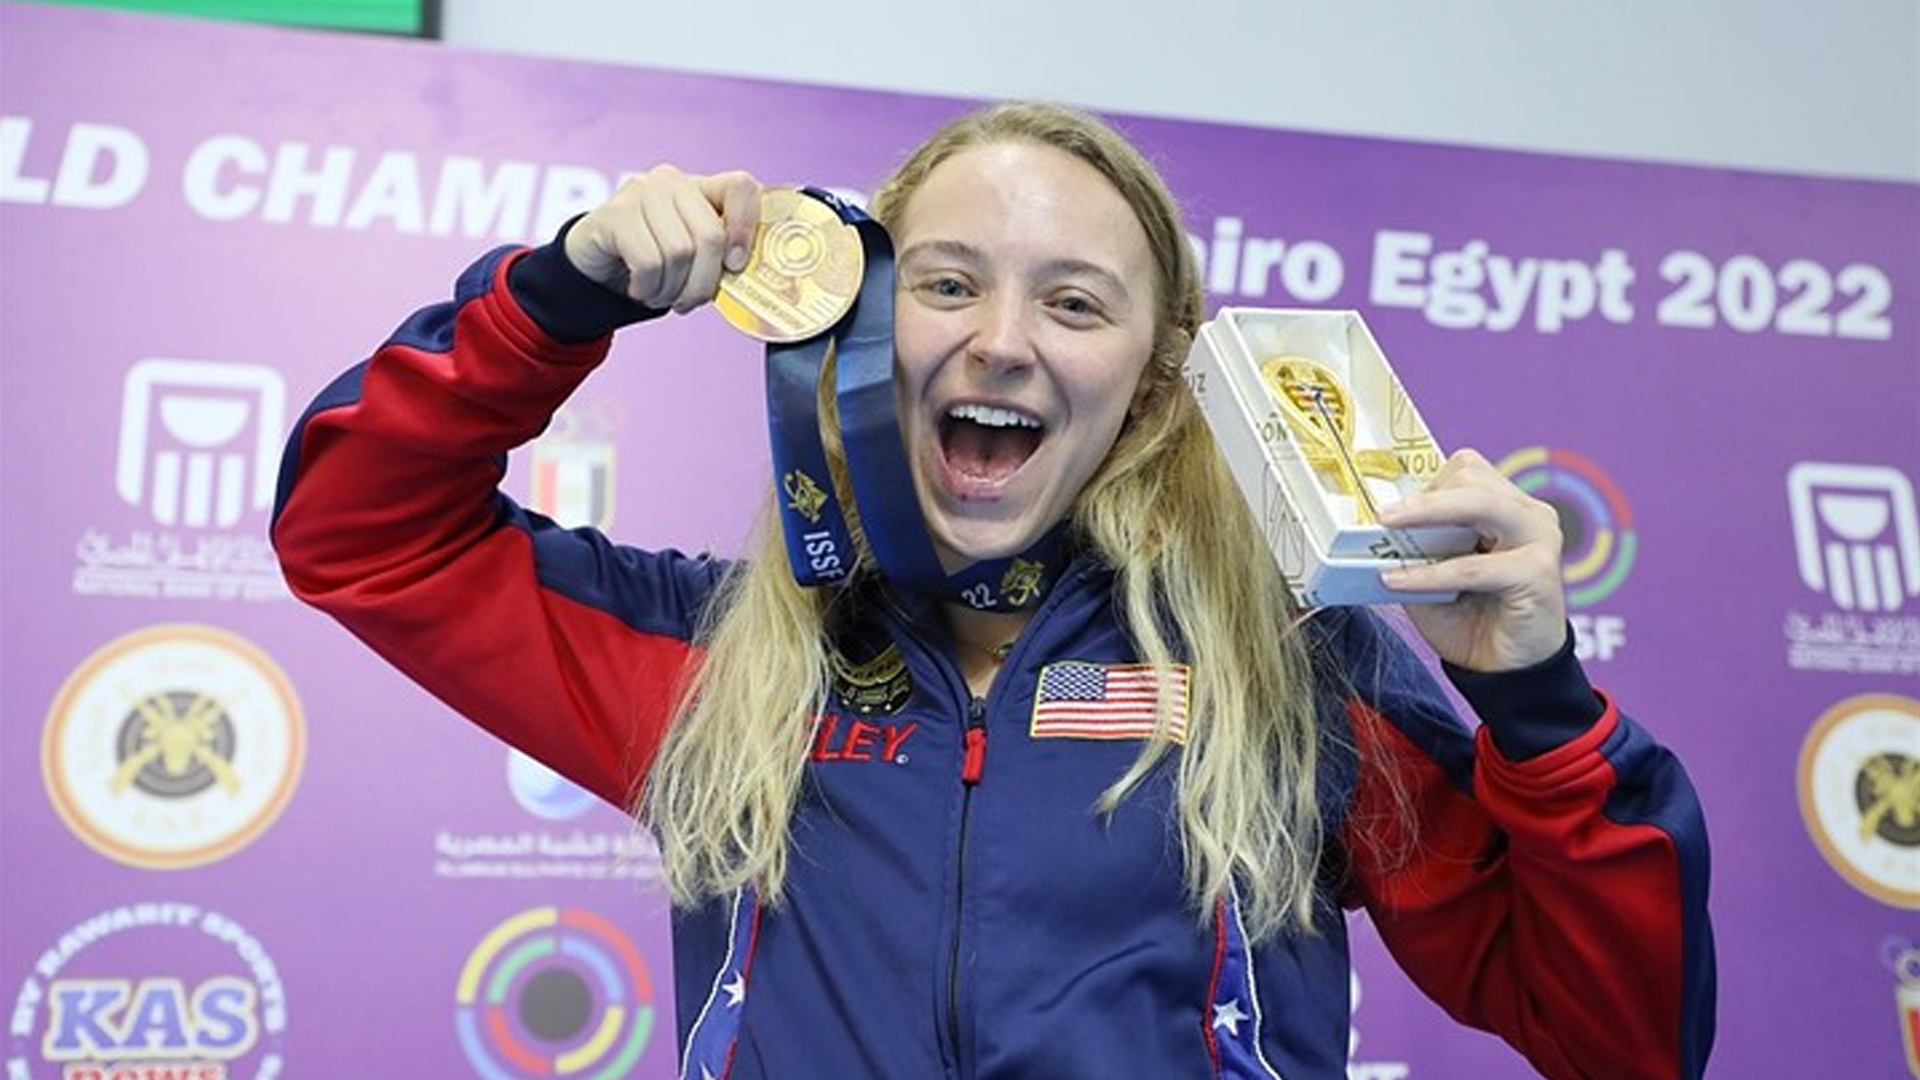 Alison Weisz with gold medal